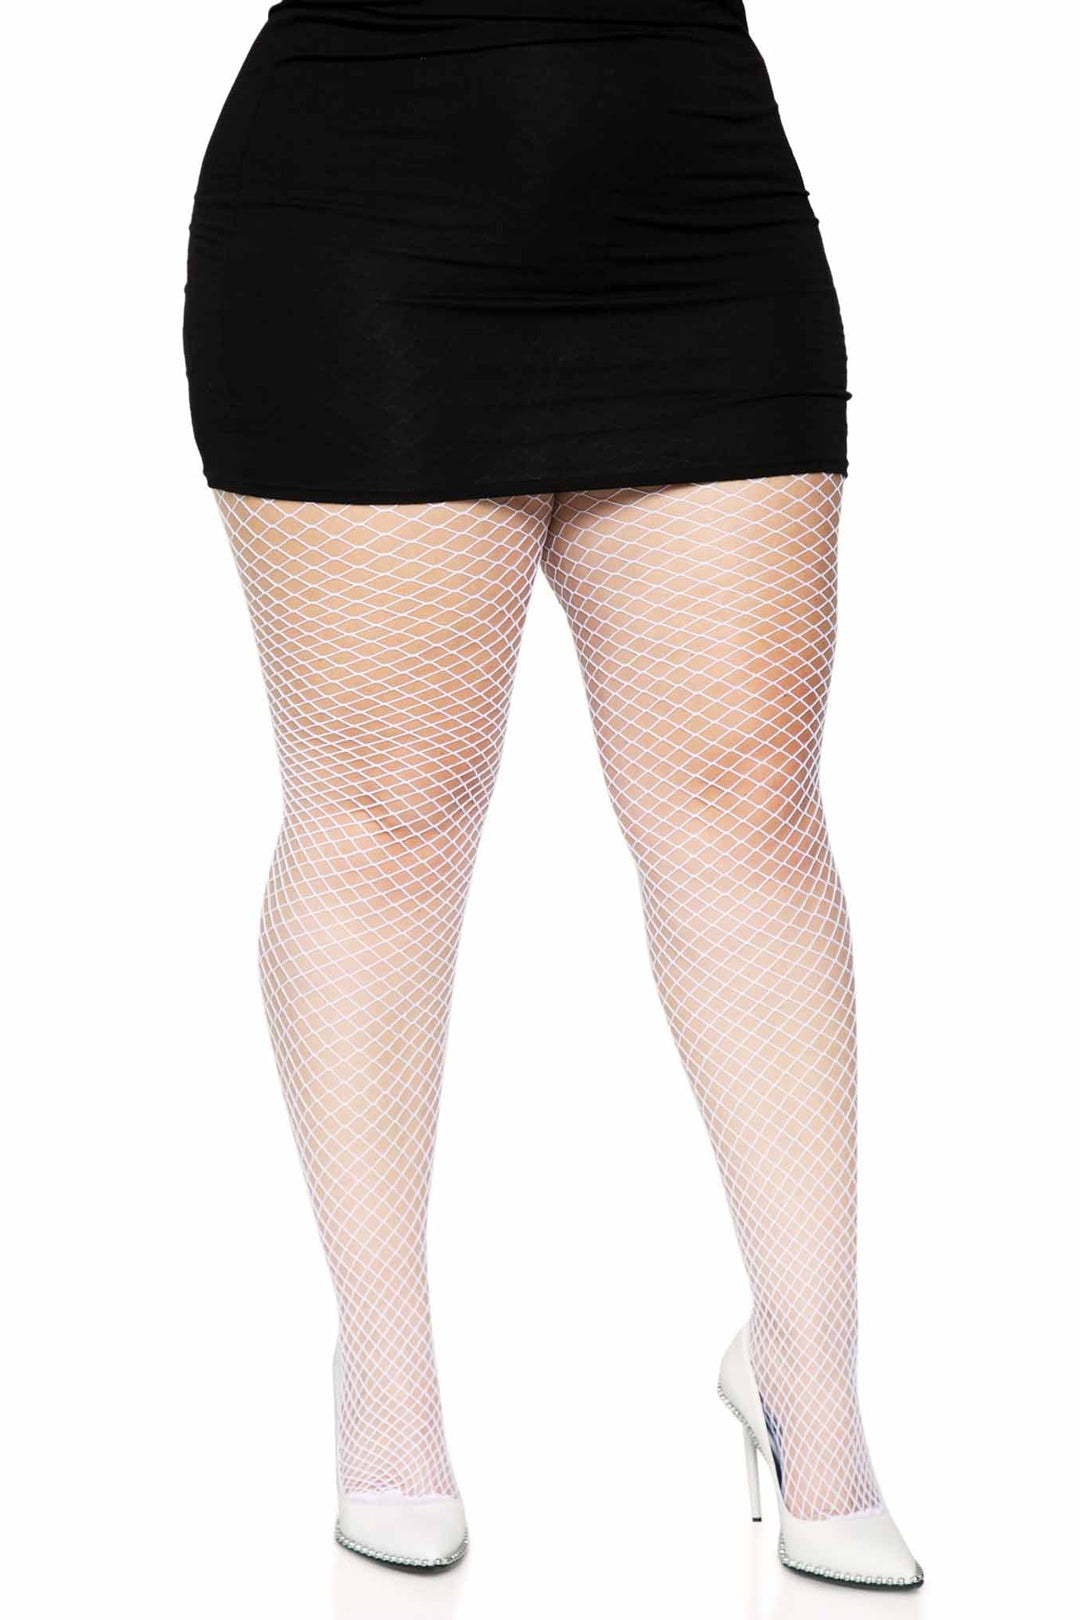 Plus Size Spandex Industrial Net Tights